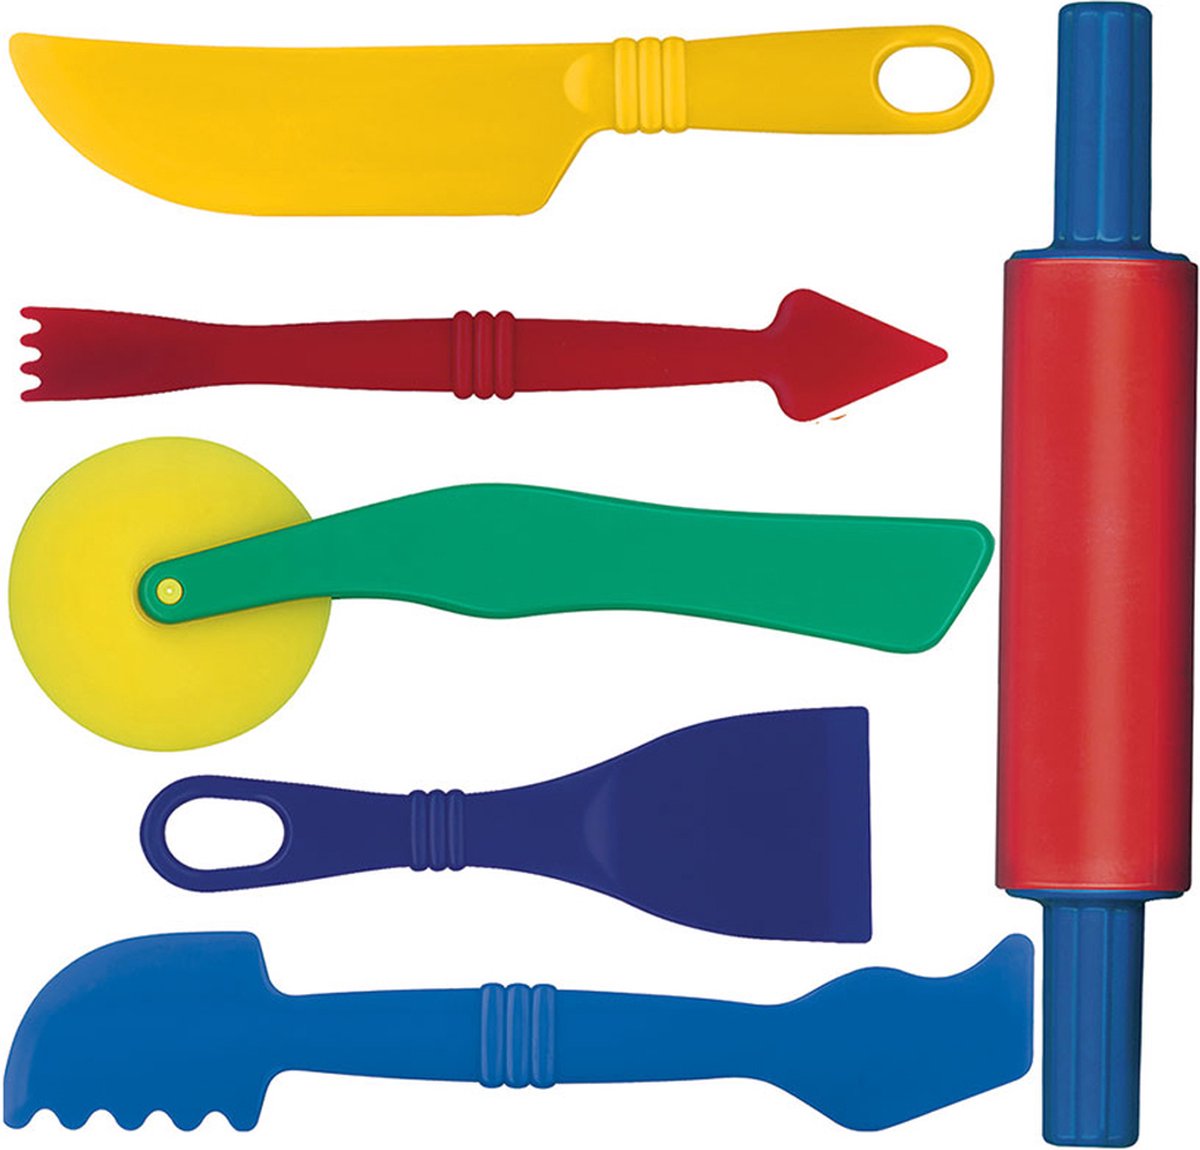 Gowi Modelling Tools - 6 pieces